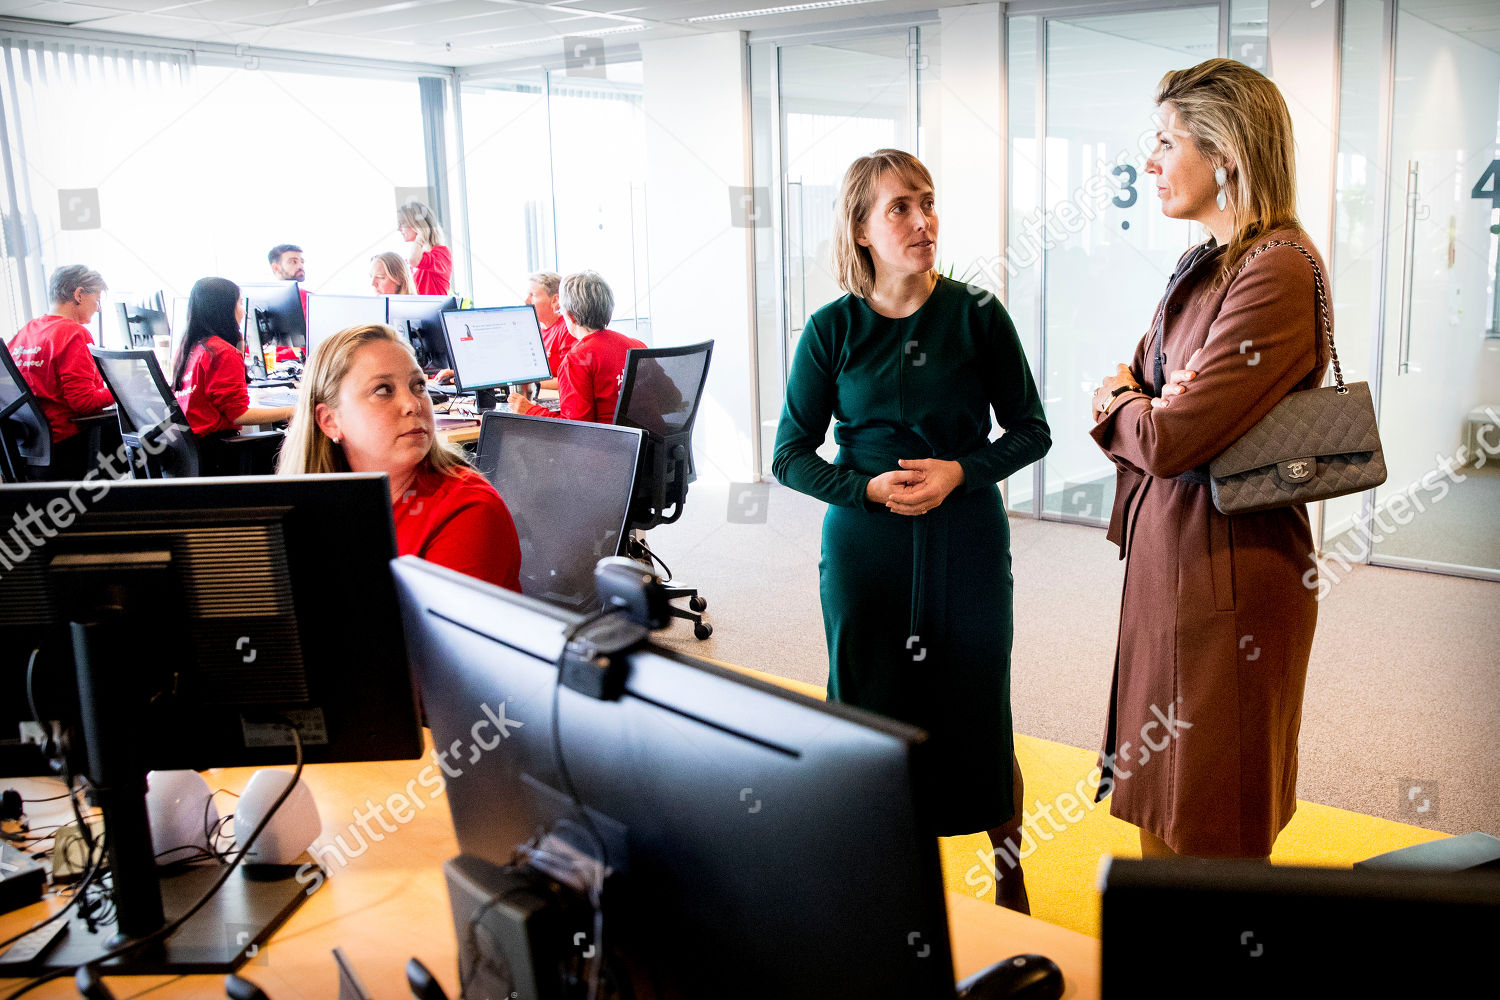 queen-maxima-visit-to-113-suicide-prevention-amsterdam-the-netherlands-shutterstock-editorial-9958922f.jpg